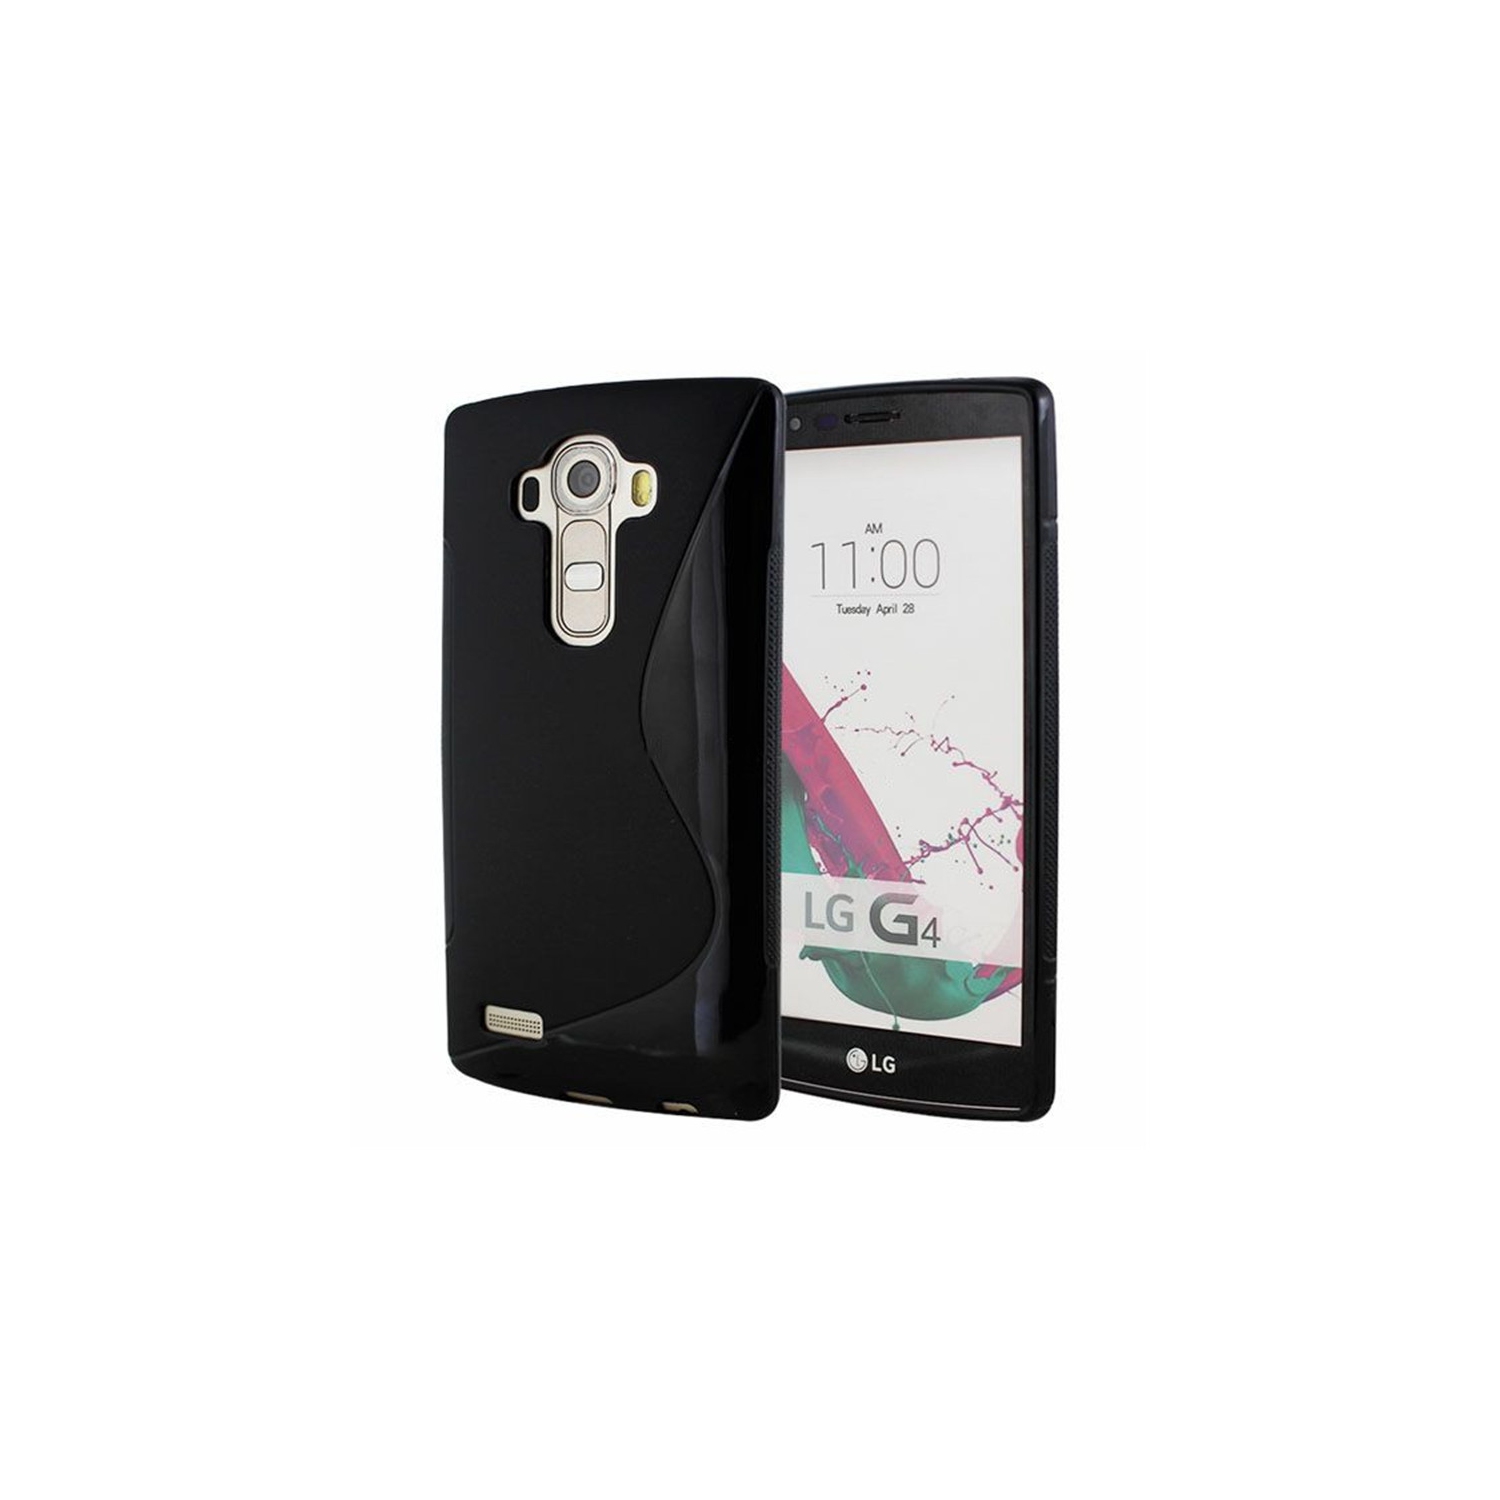 【CSmart】 Ultra Thin Soft TPU Silicone Jelly Bumper Back Cover Case for LG G4, Black